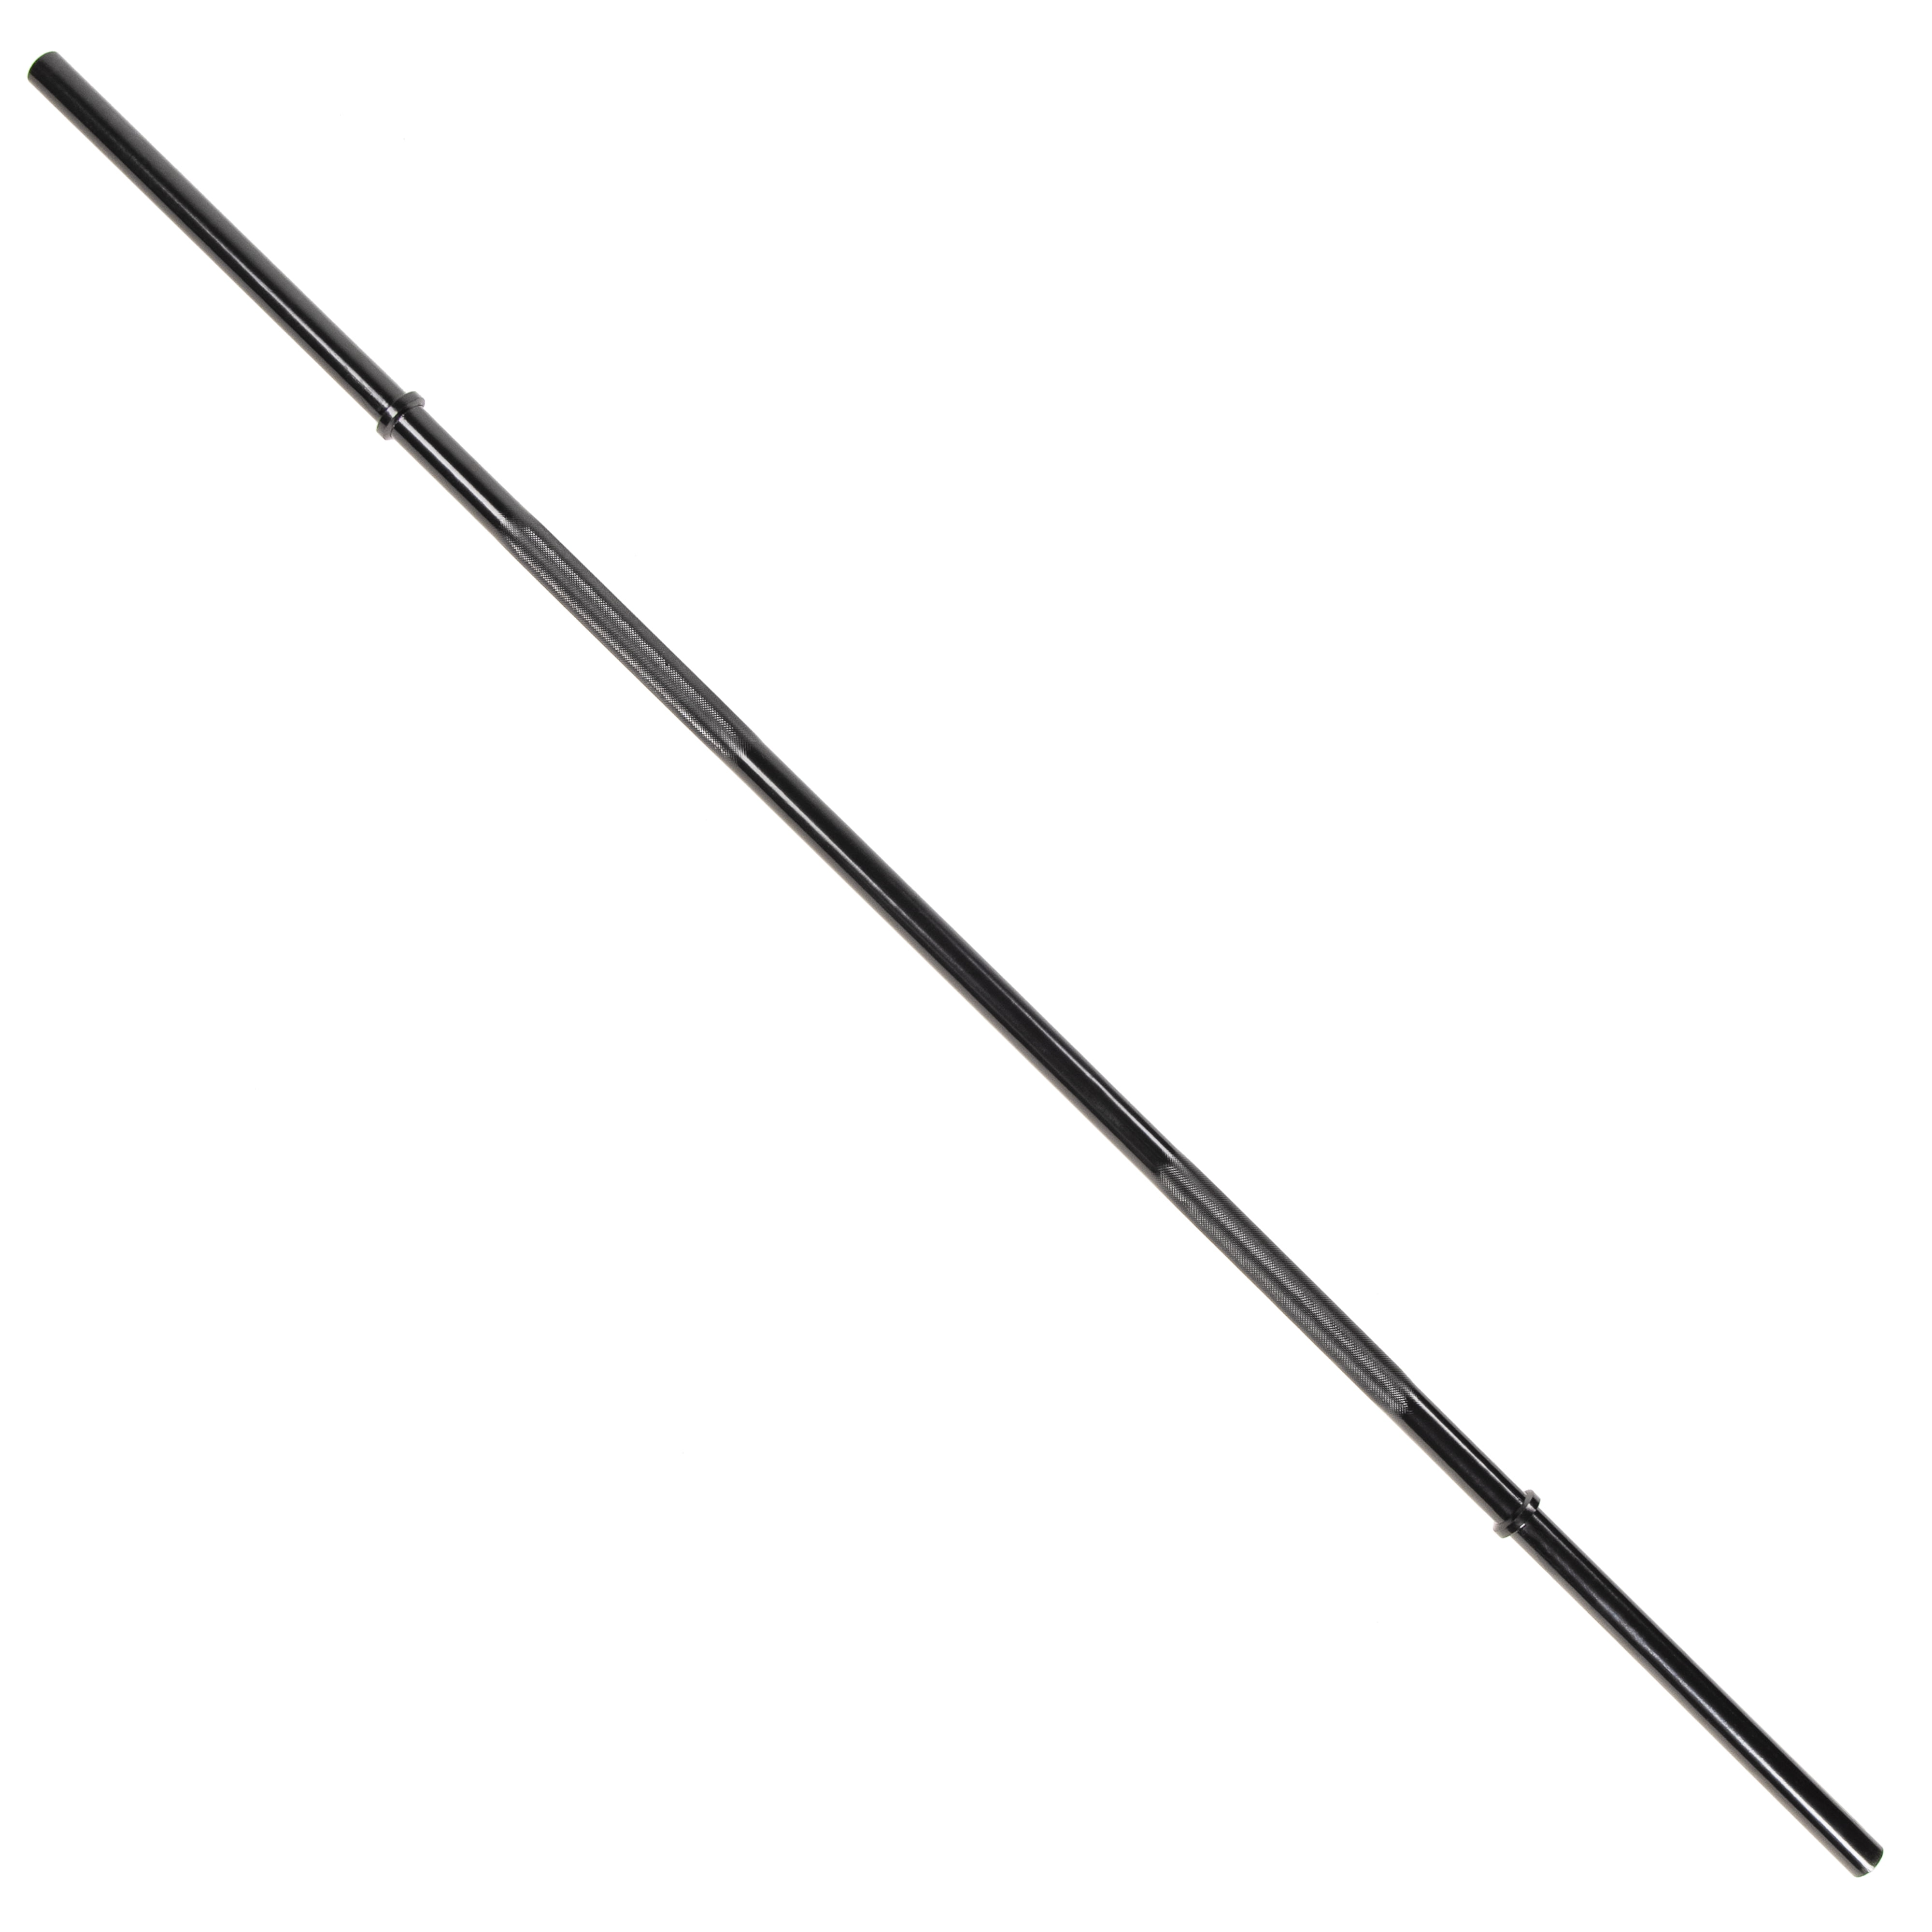 2 Inch Olympic Weight Bar 5 Ft CAP Barbell Home Exercise Weight Lifting Training 